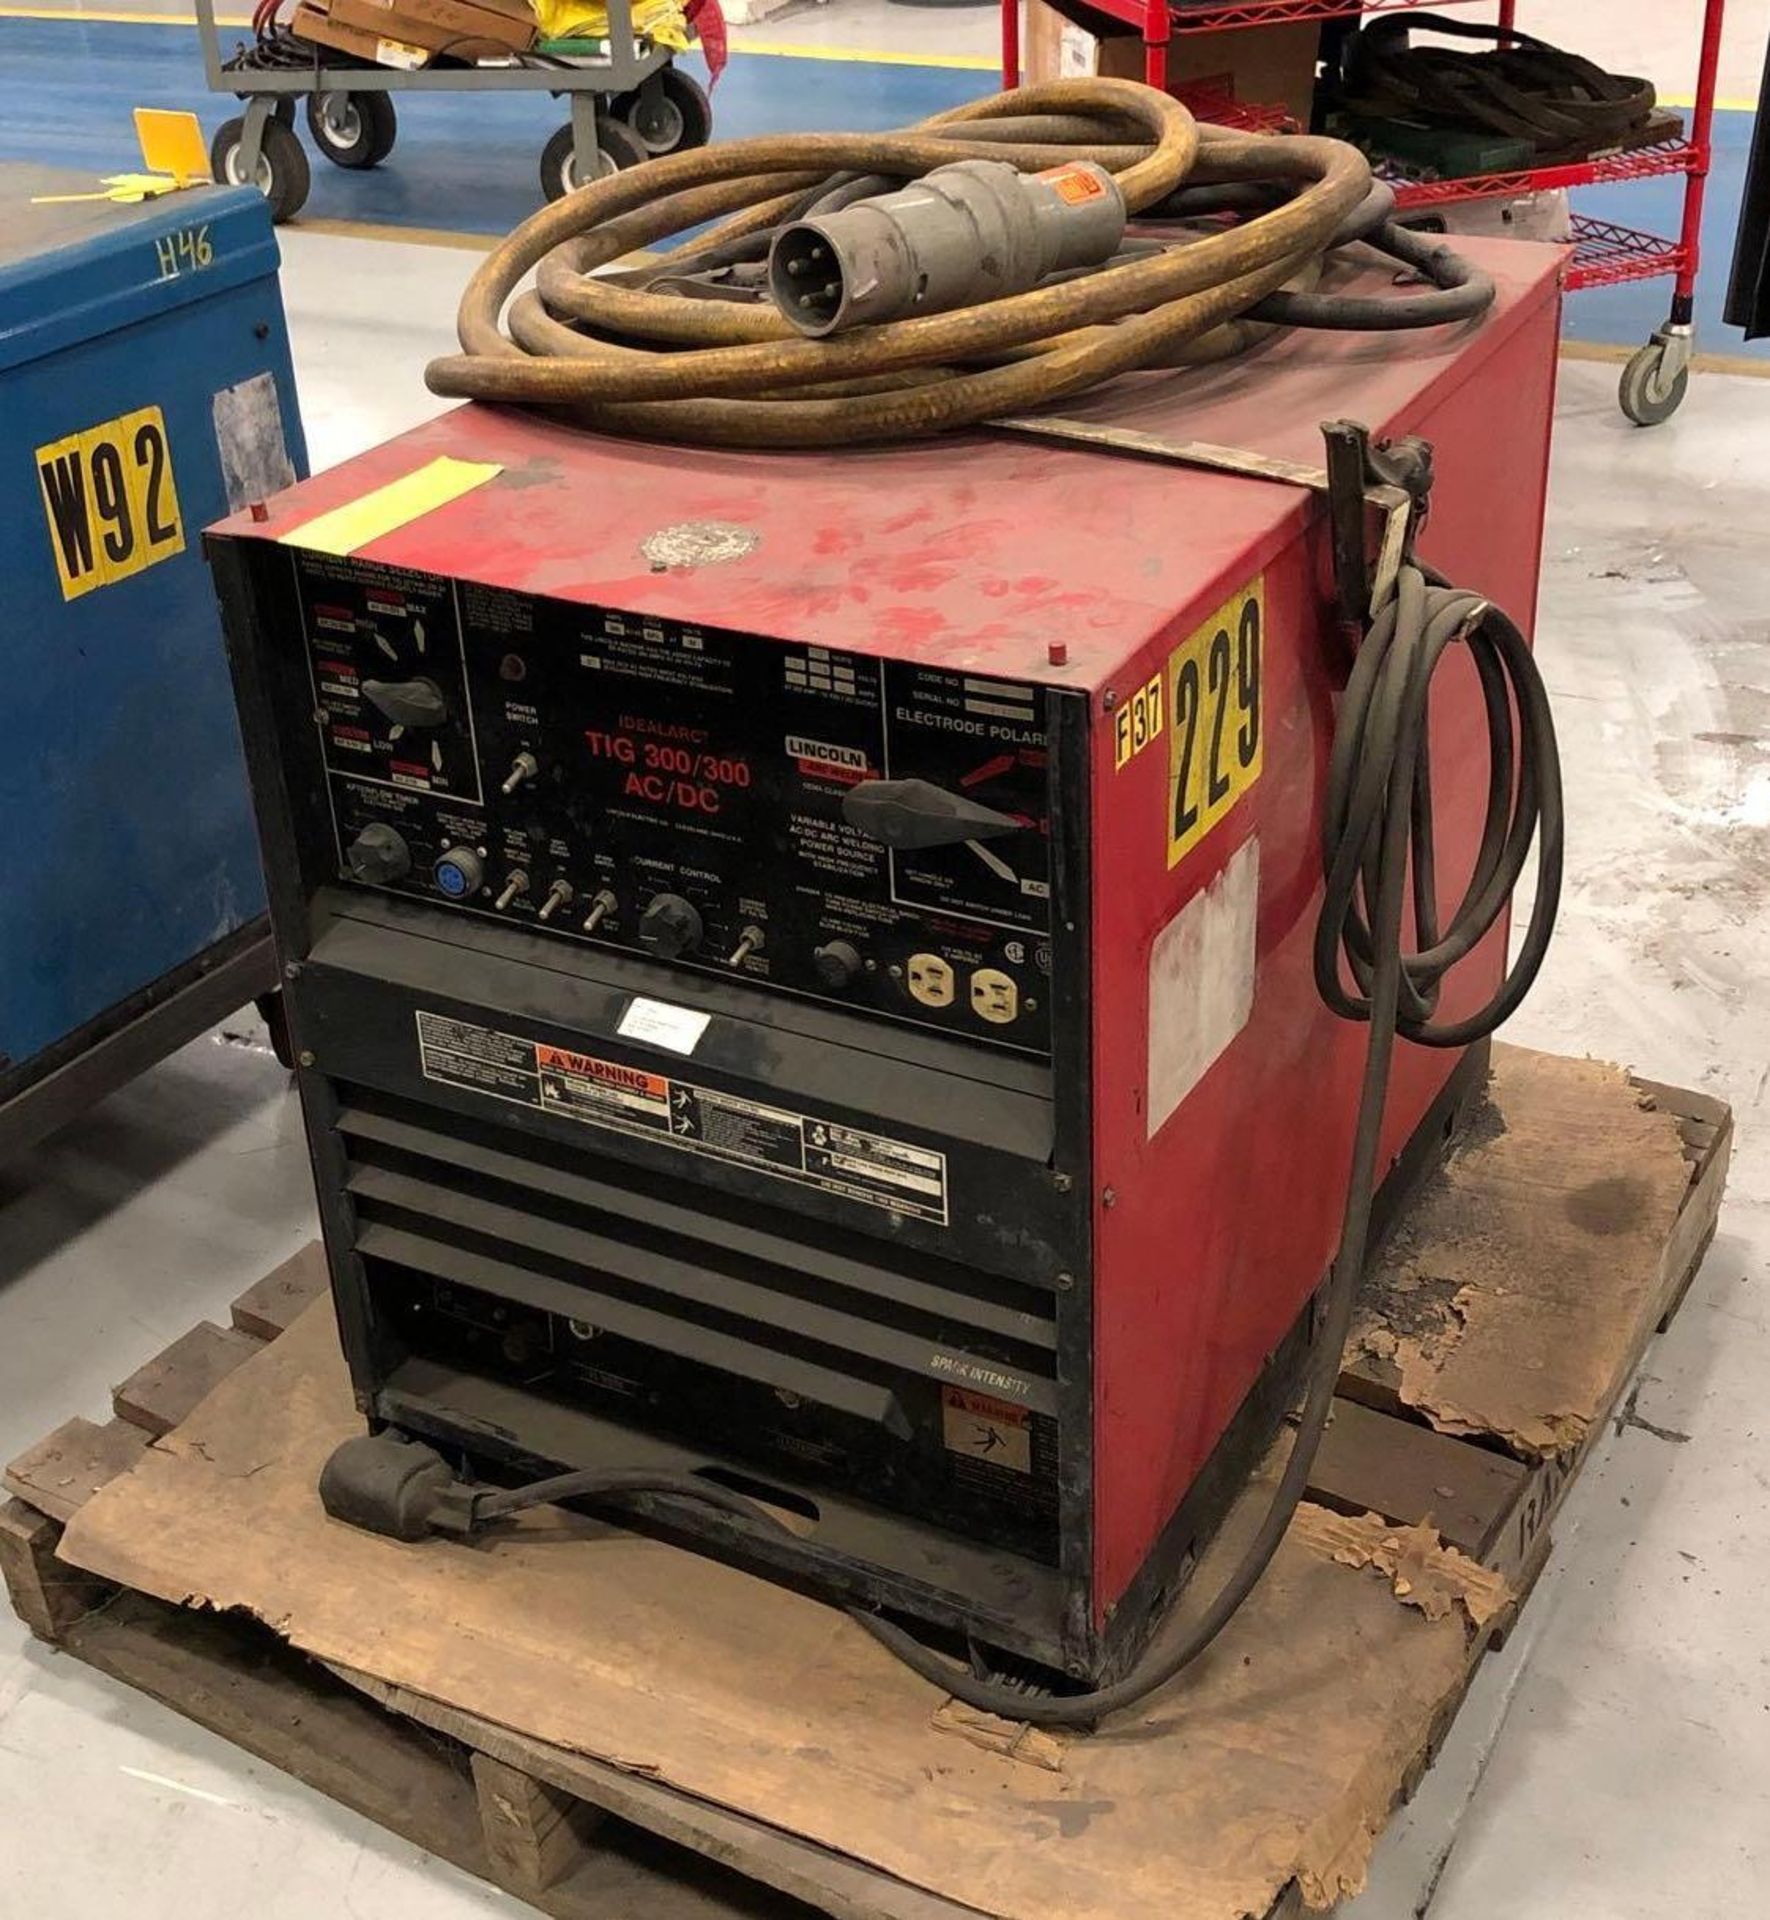 Lincoln 300Amp Idealarc TIG 300/300 Power Supply w/ Cables - Image 4 of 16